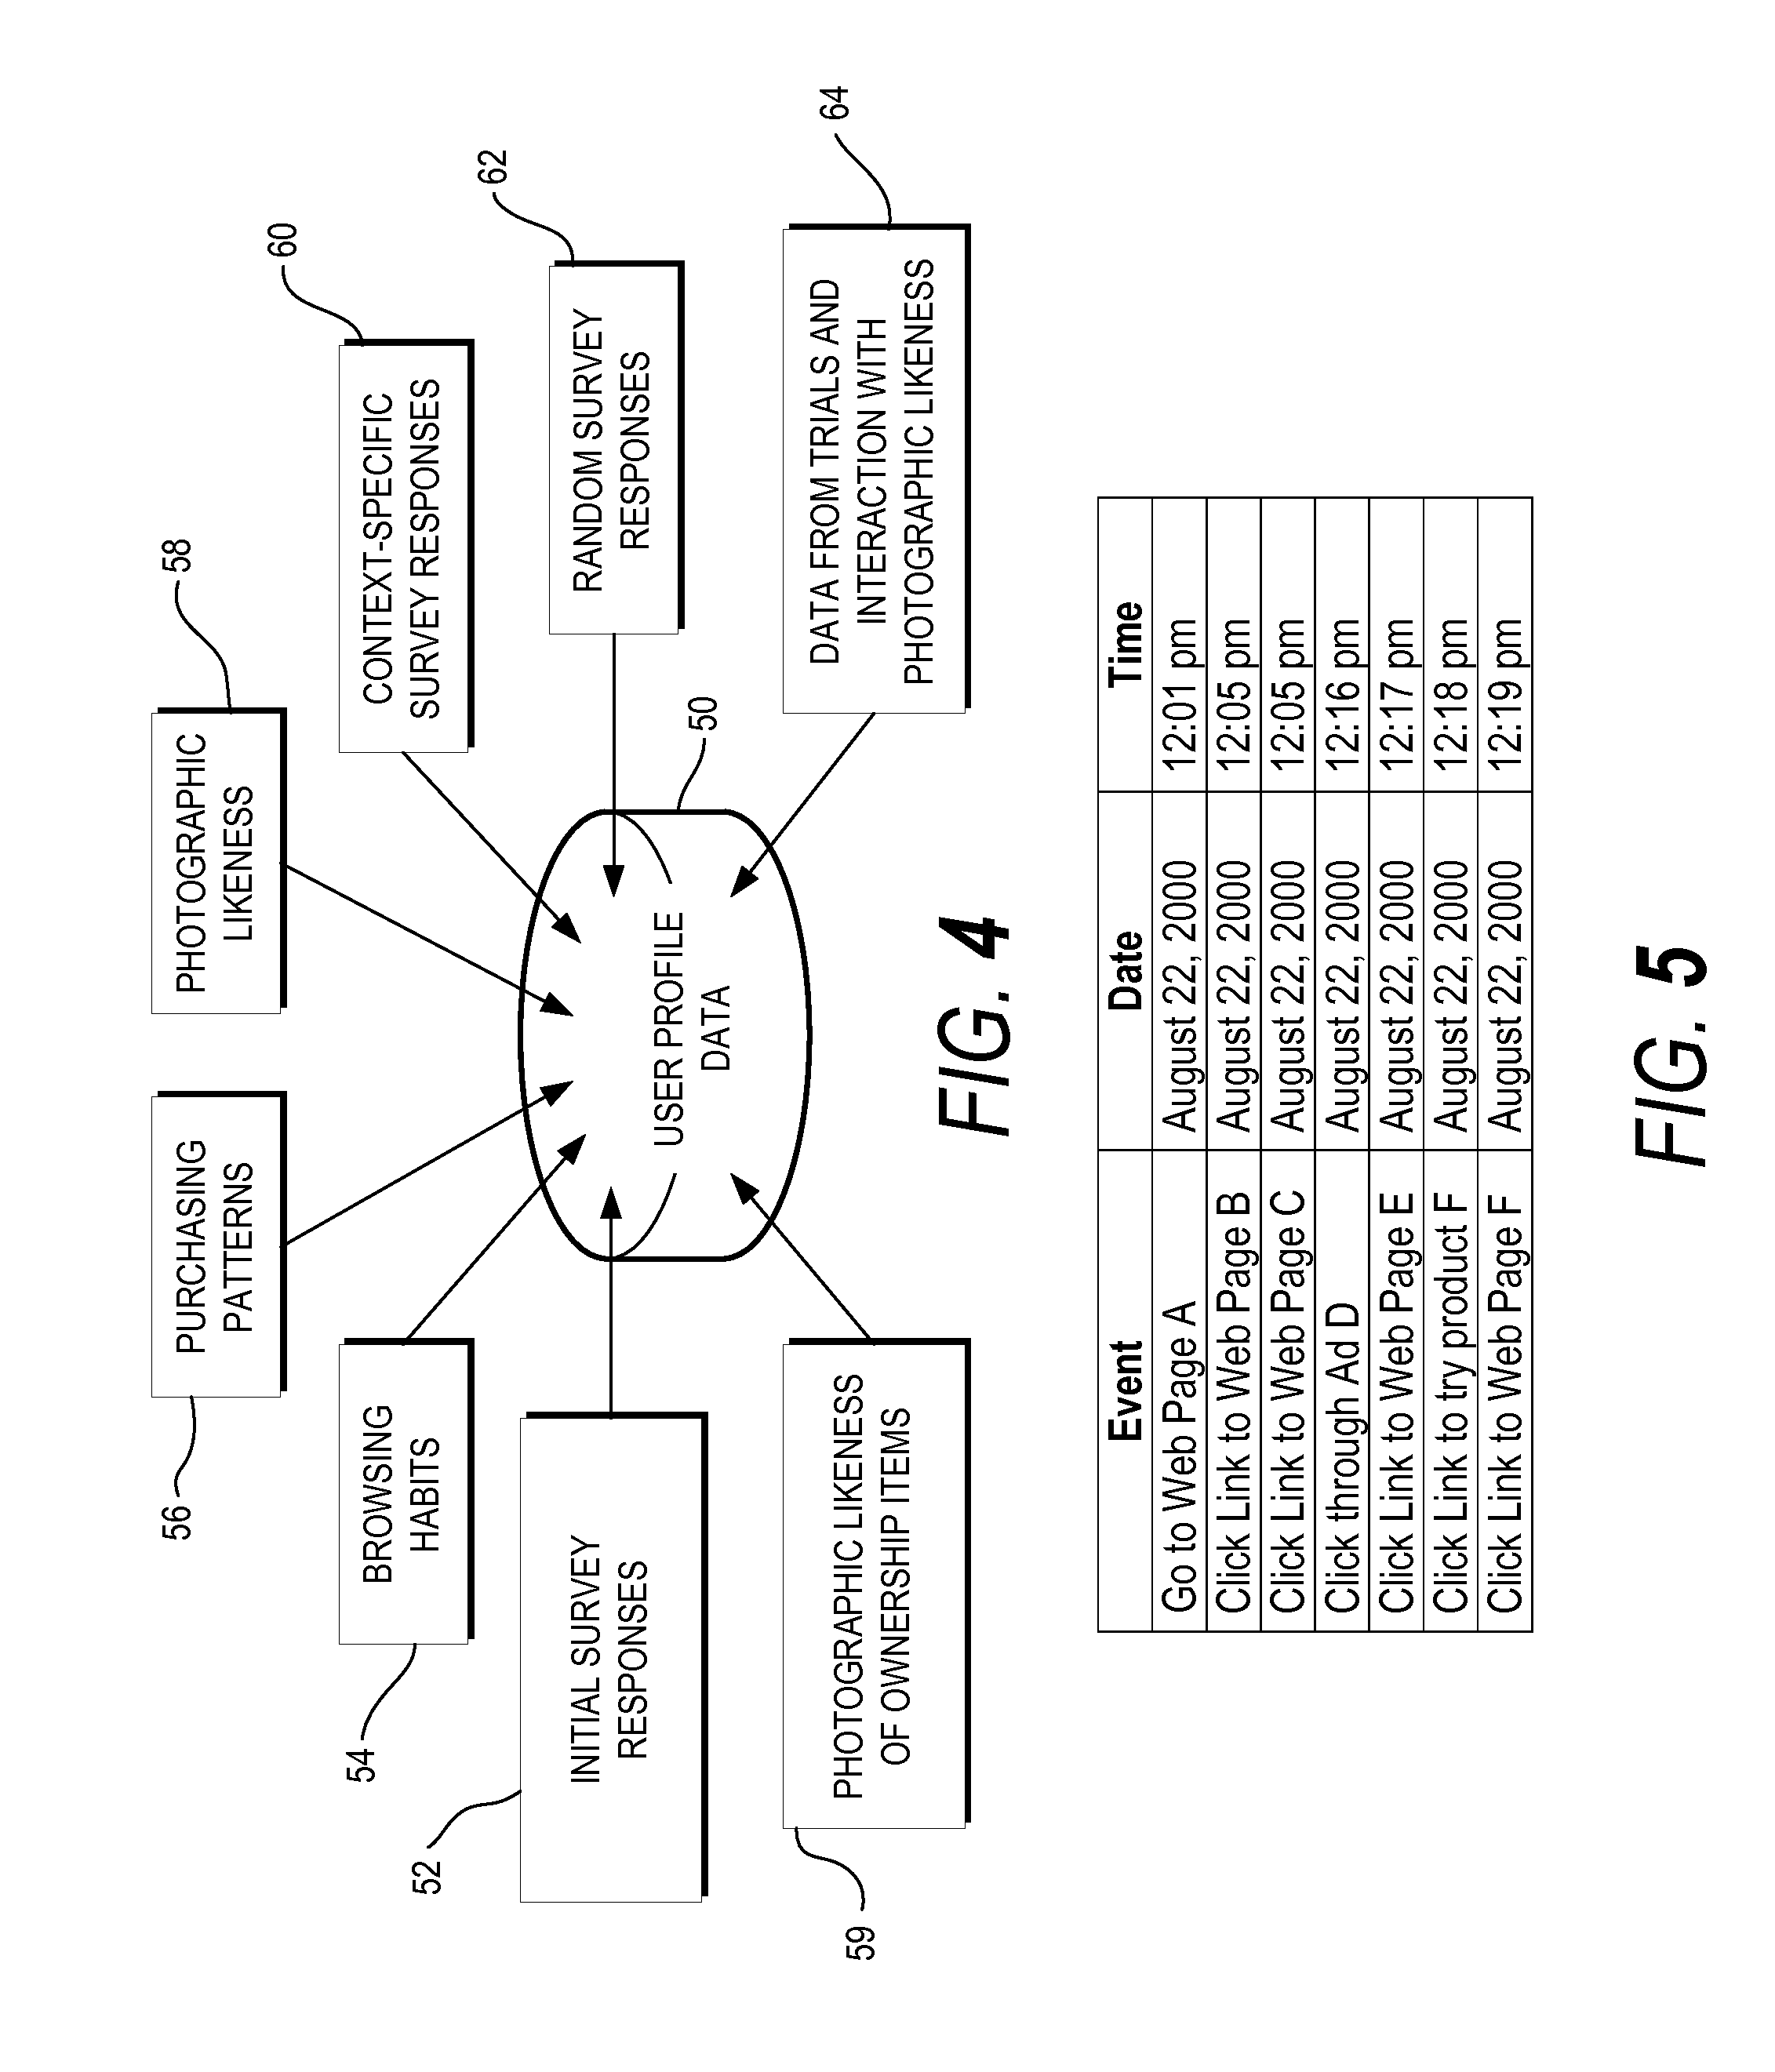 Targeted Marketing System and Method